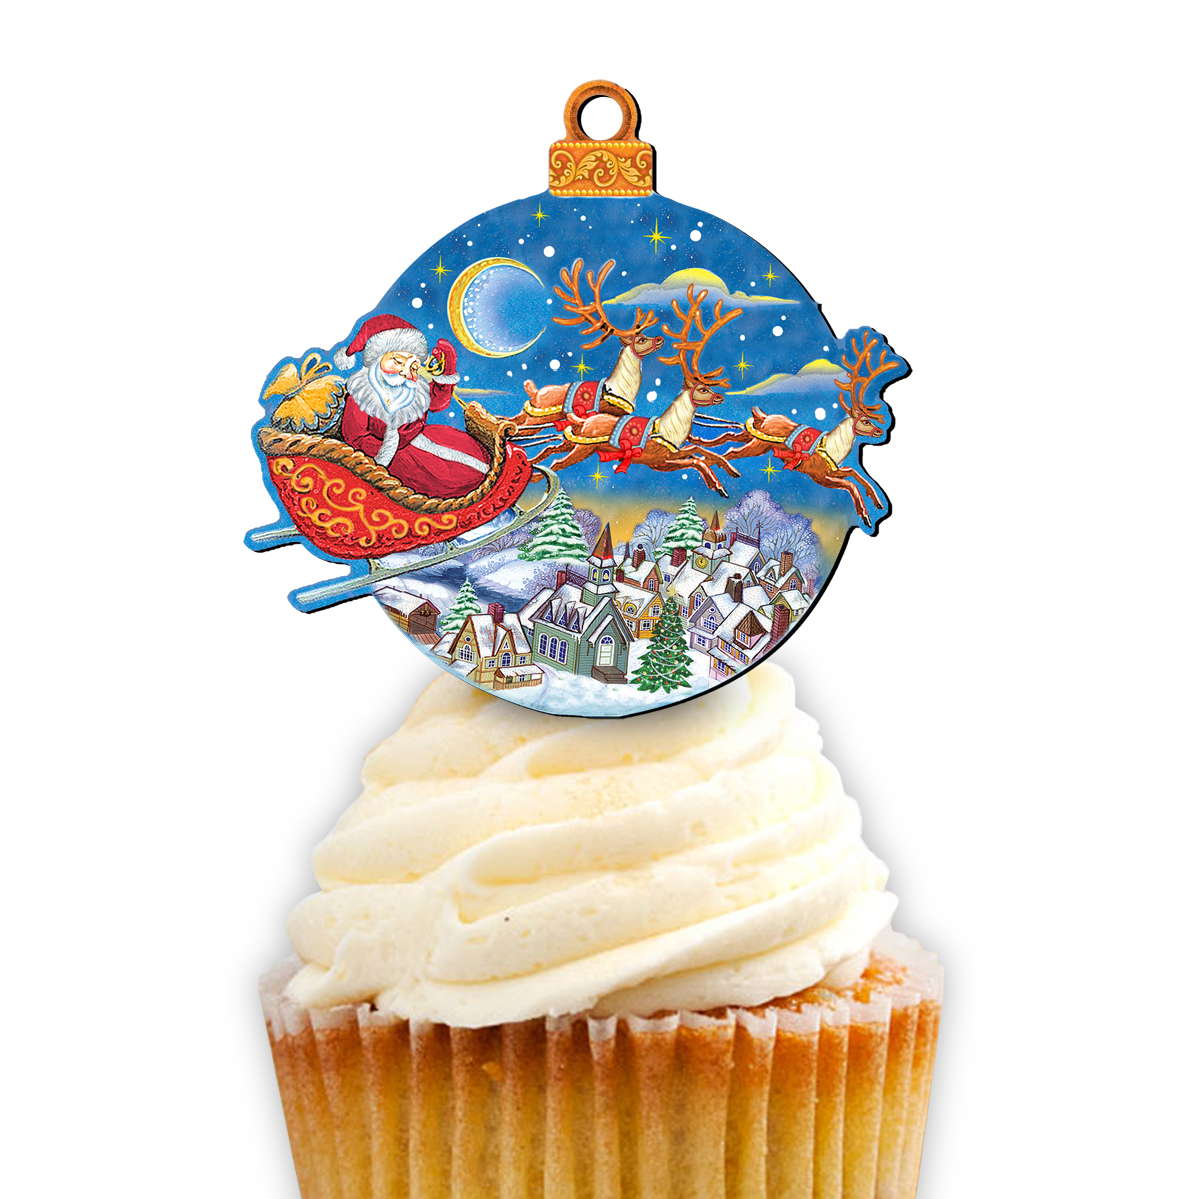 8112160ct Up-up & Away Cupcake & Cake Toppers